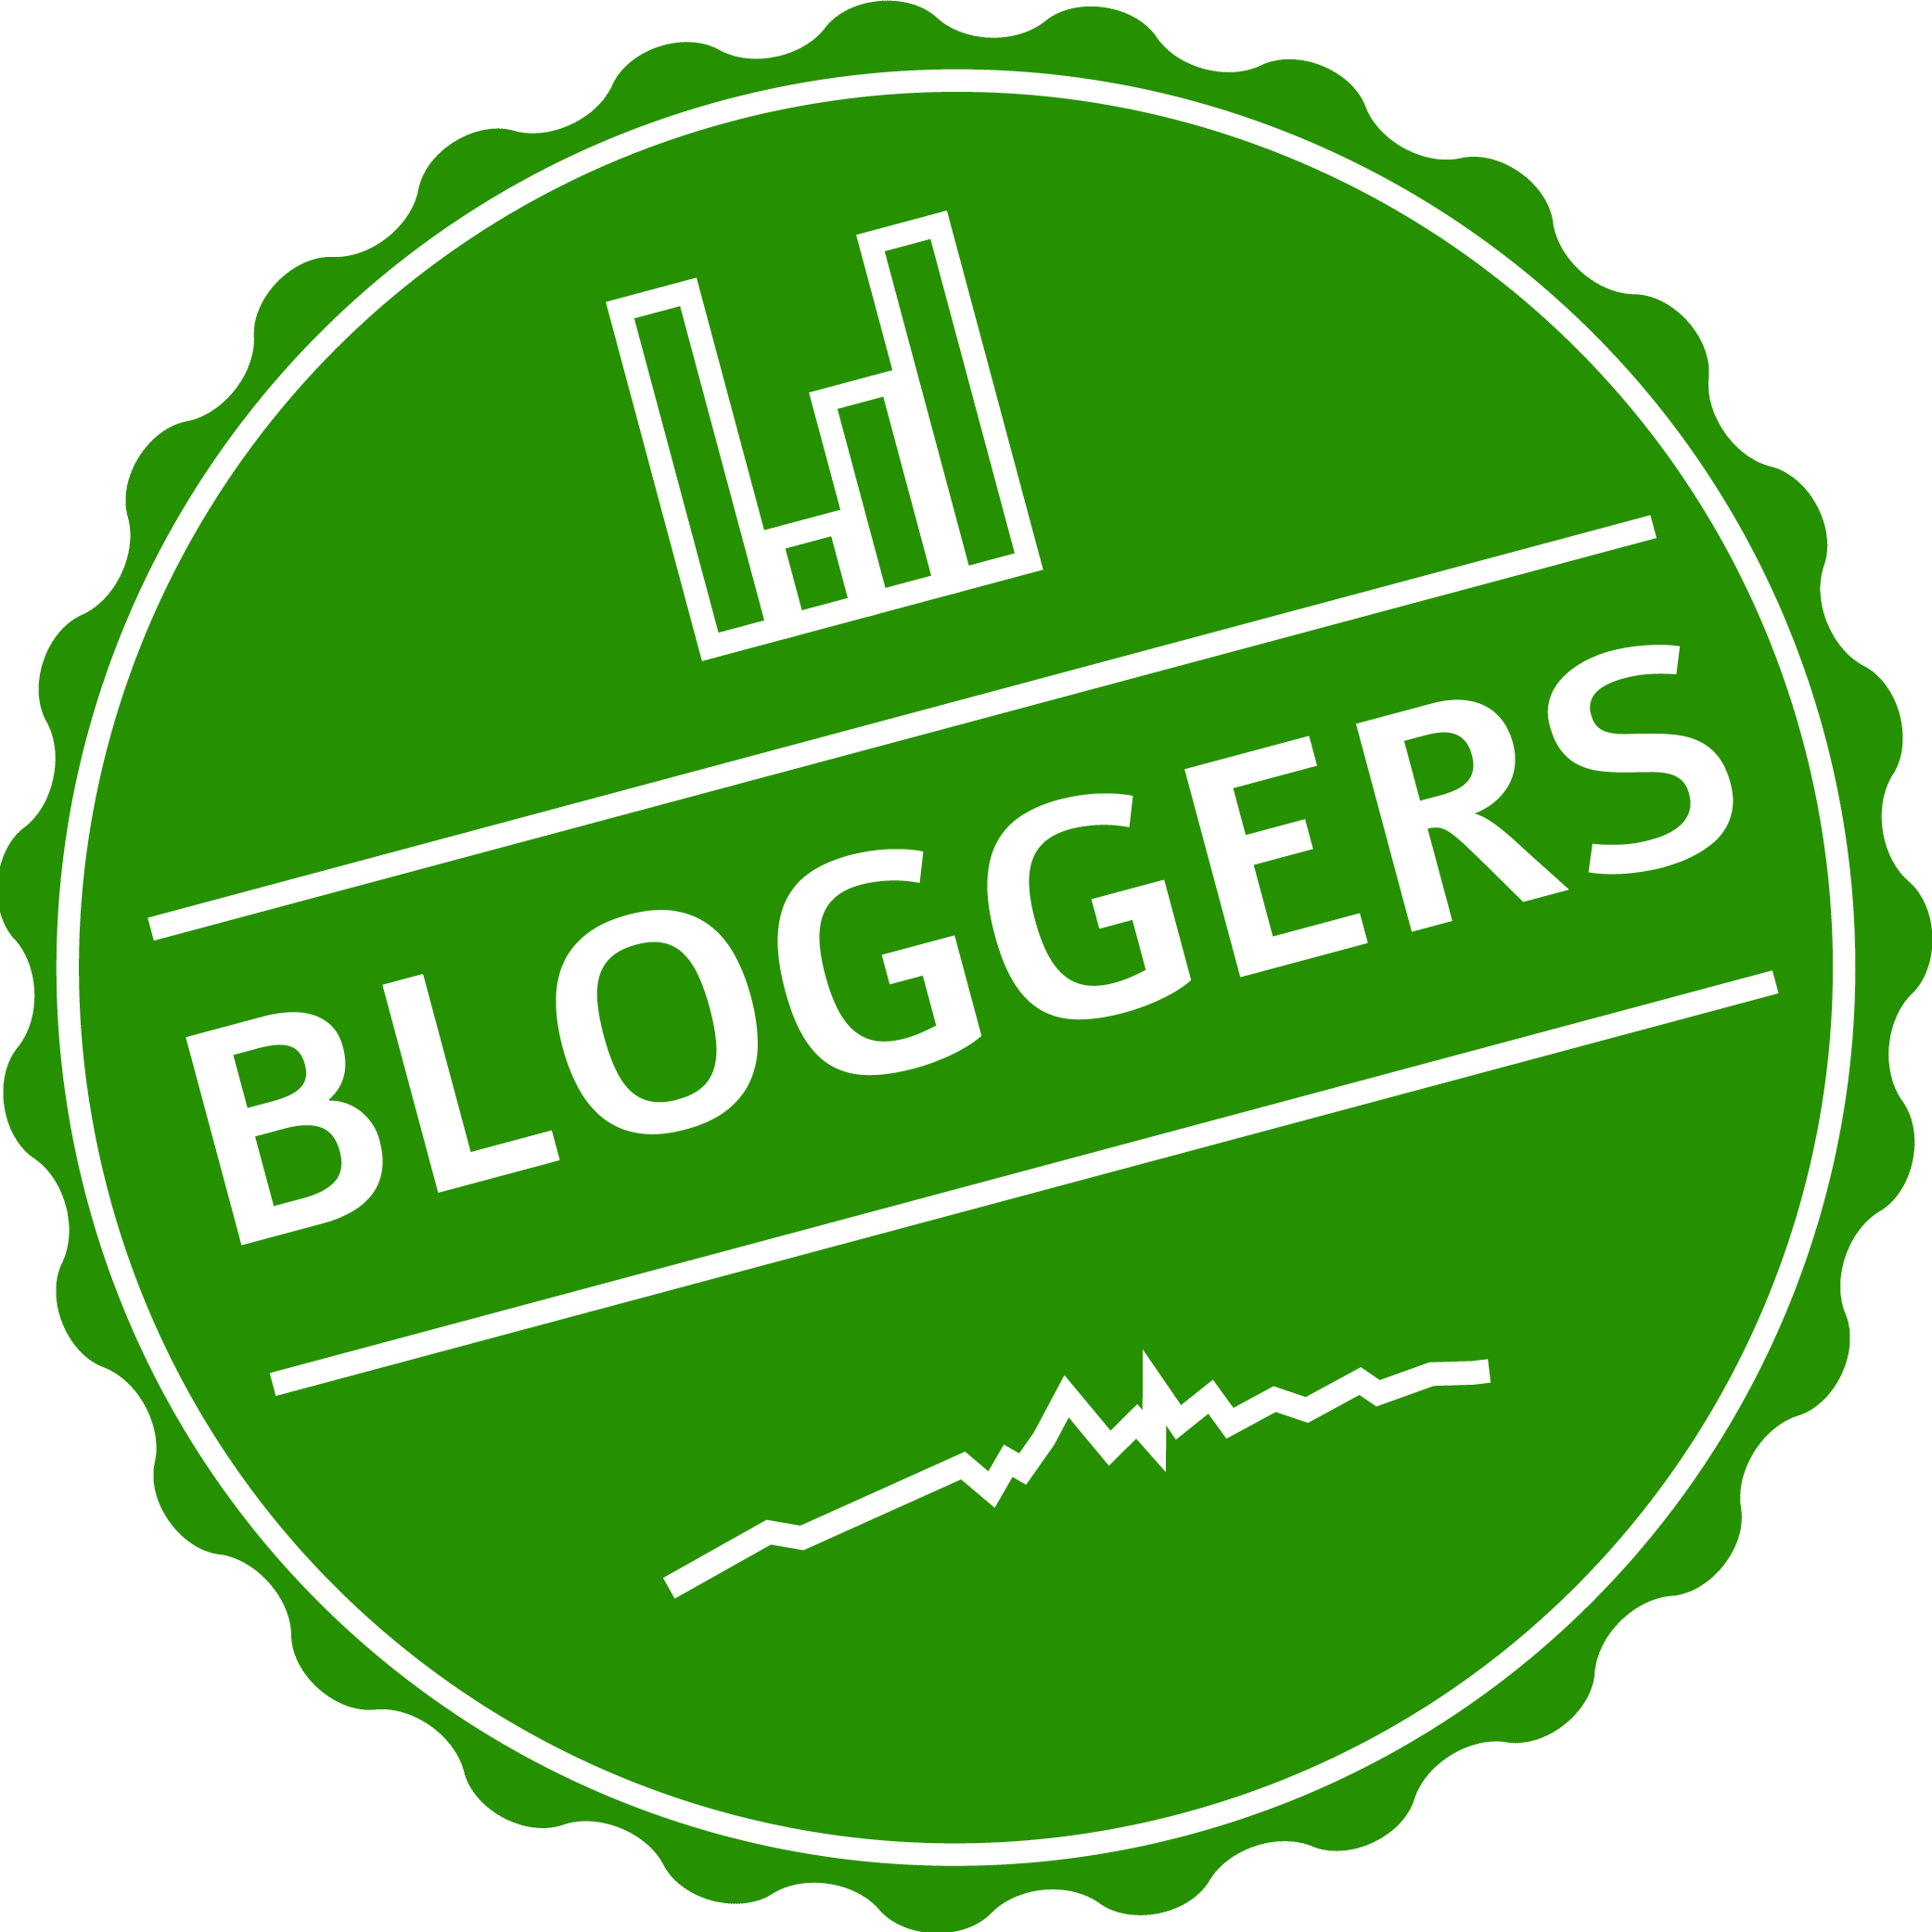 Bloggers-in-Green